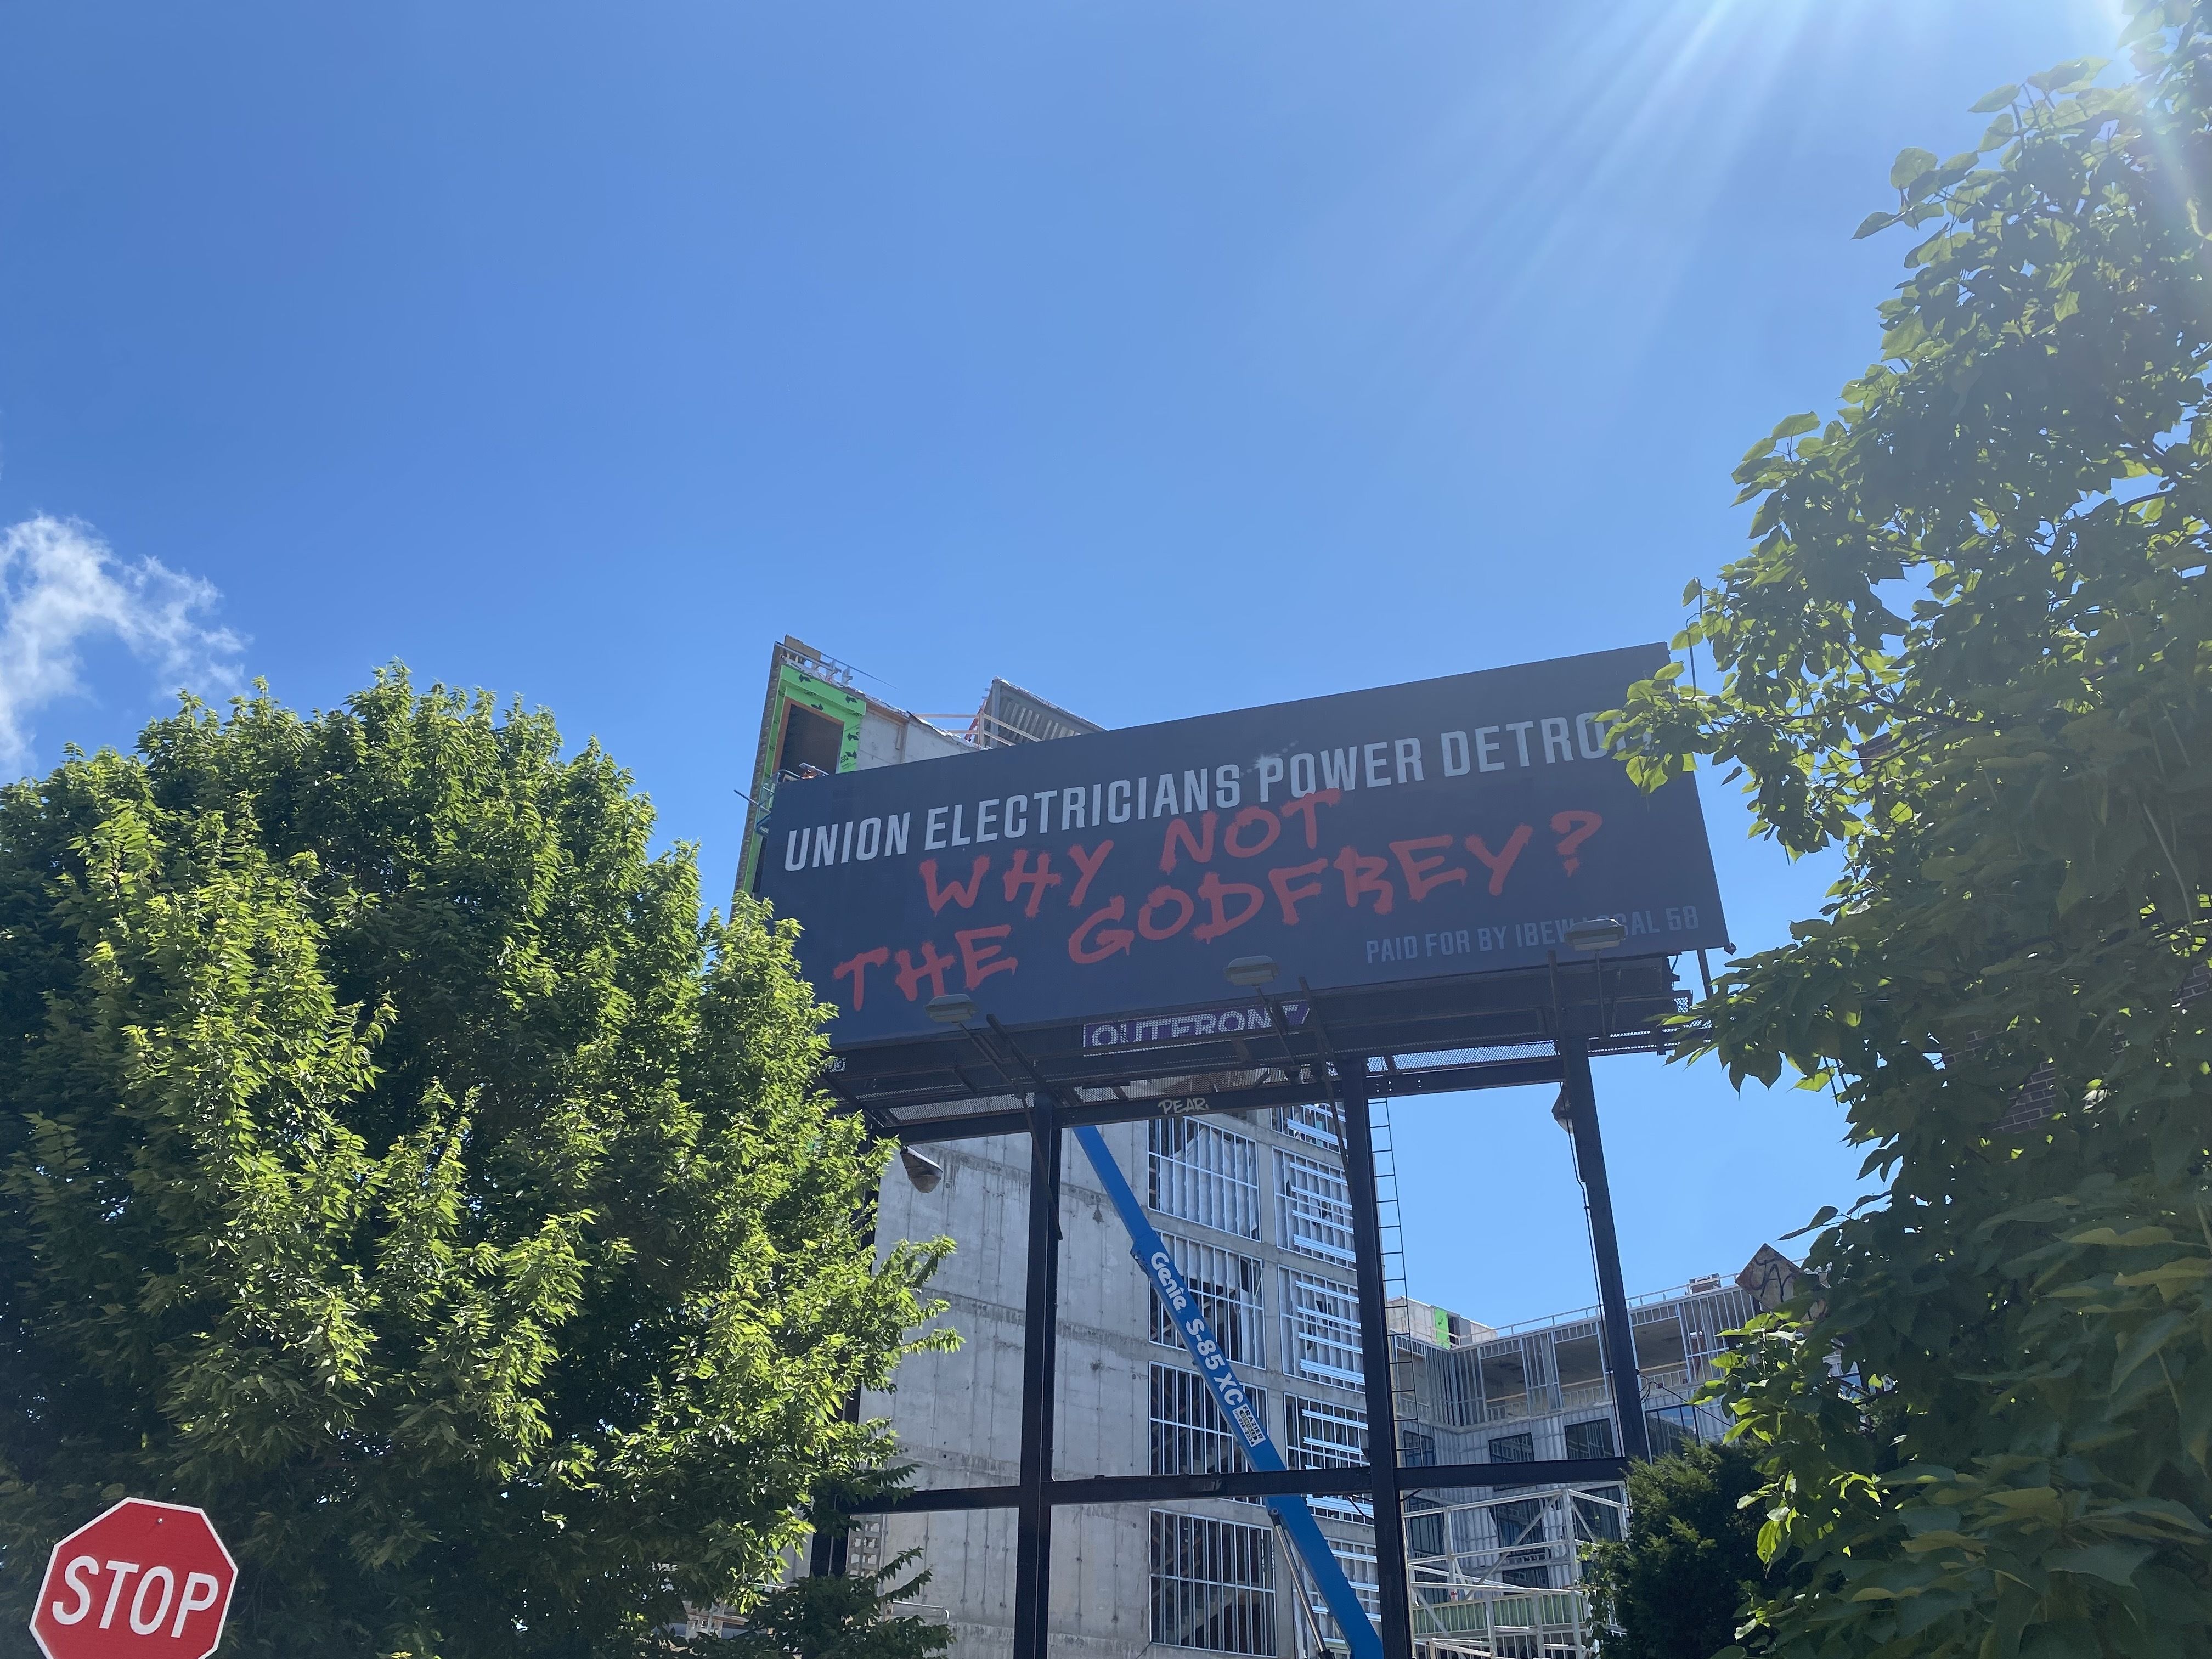 A billboard says "Union electricians power Detroit" then "Why not the Godfrey?"